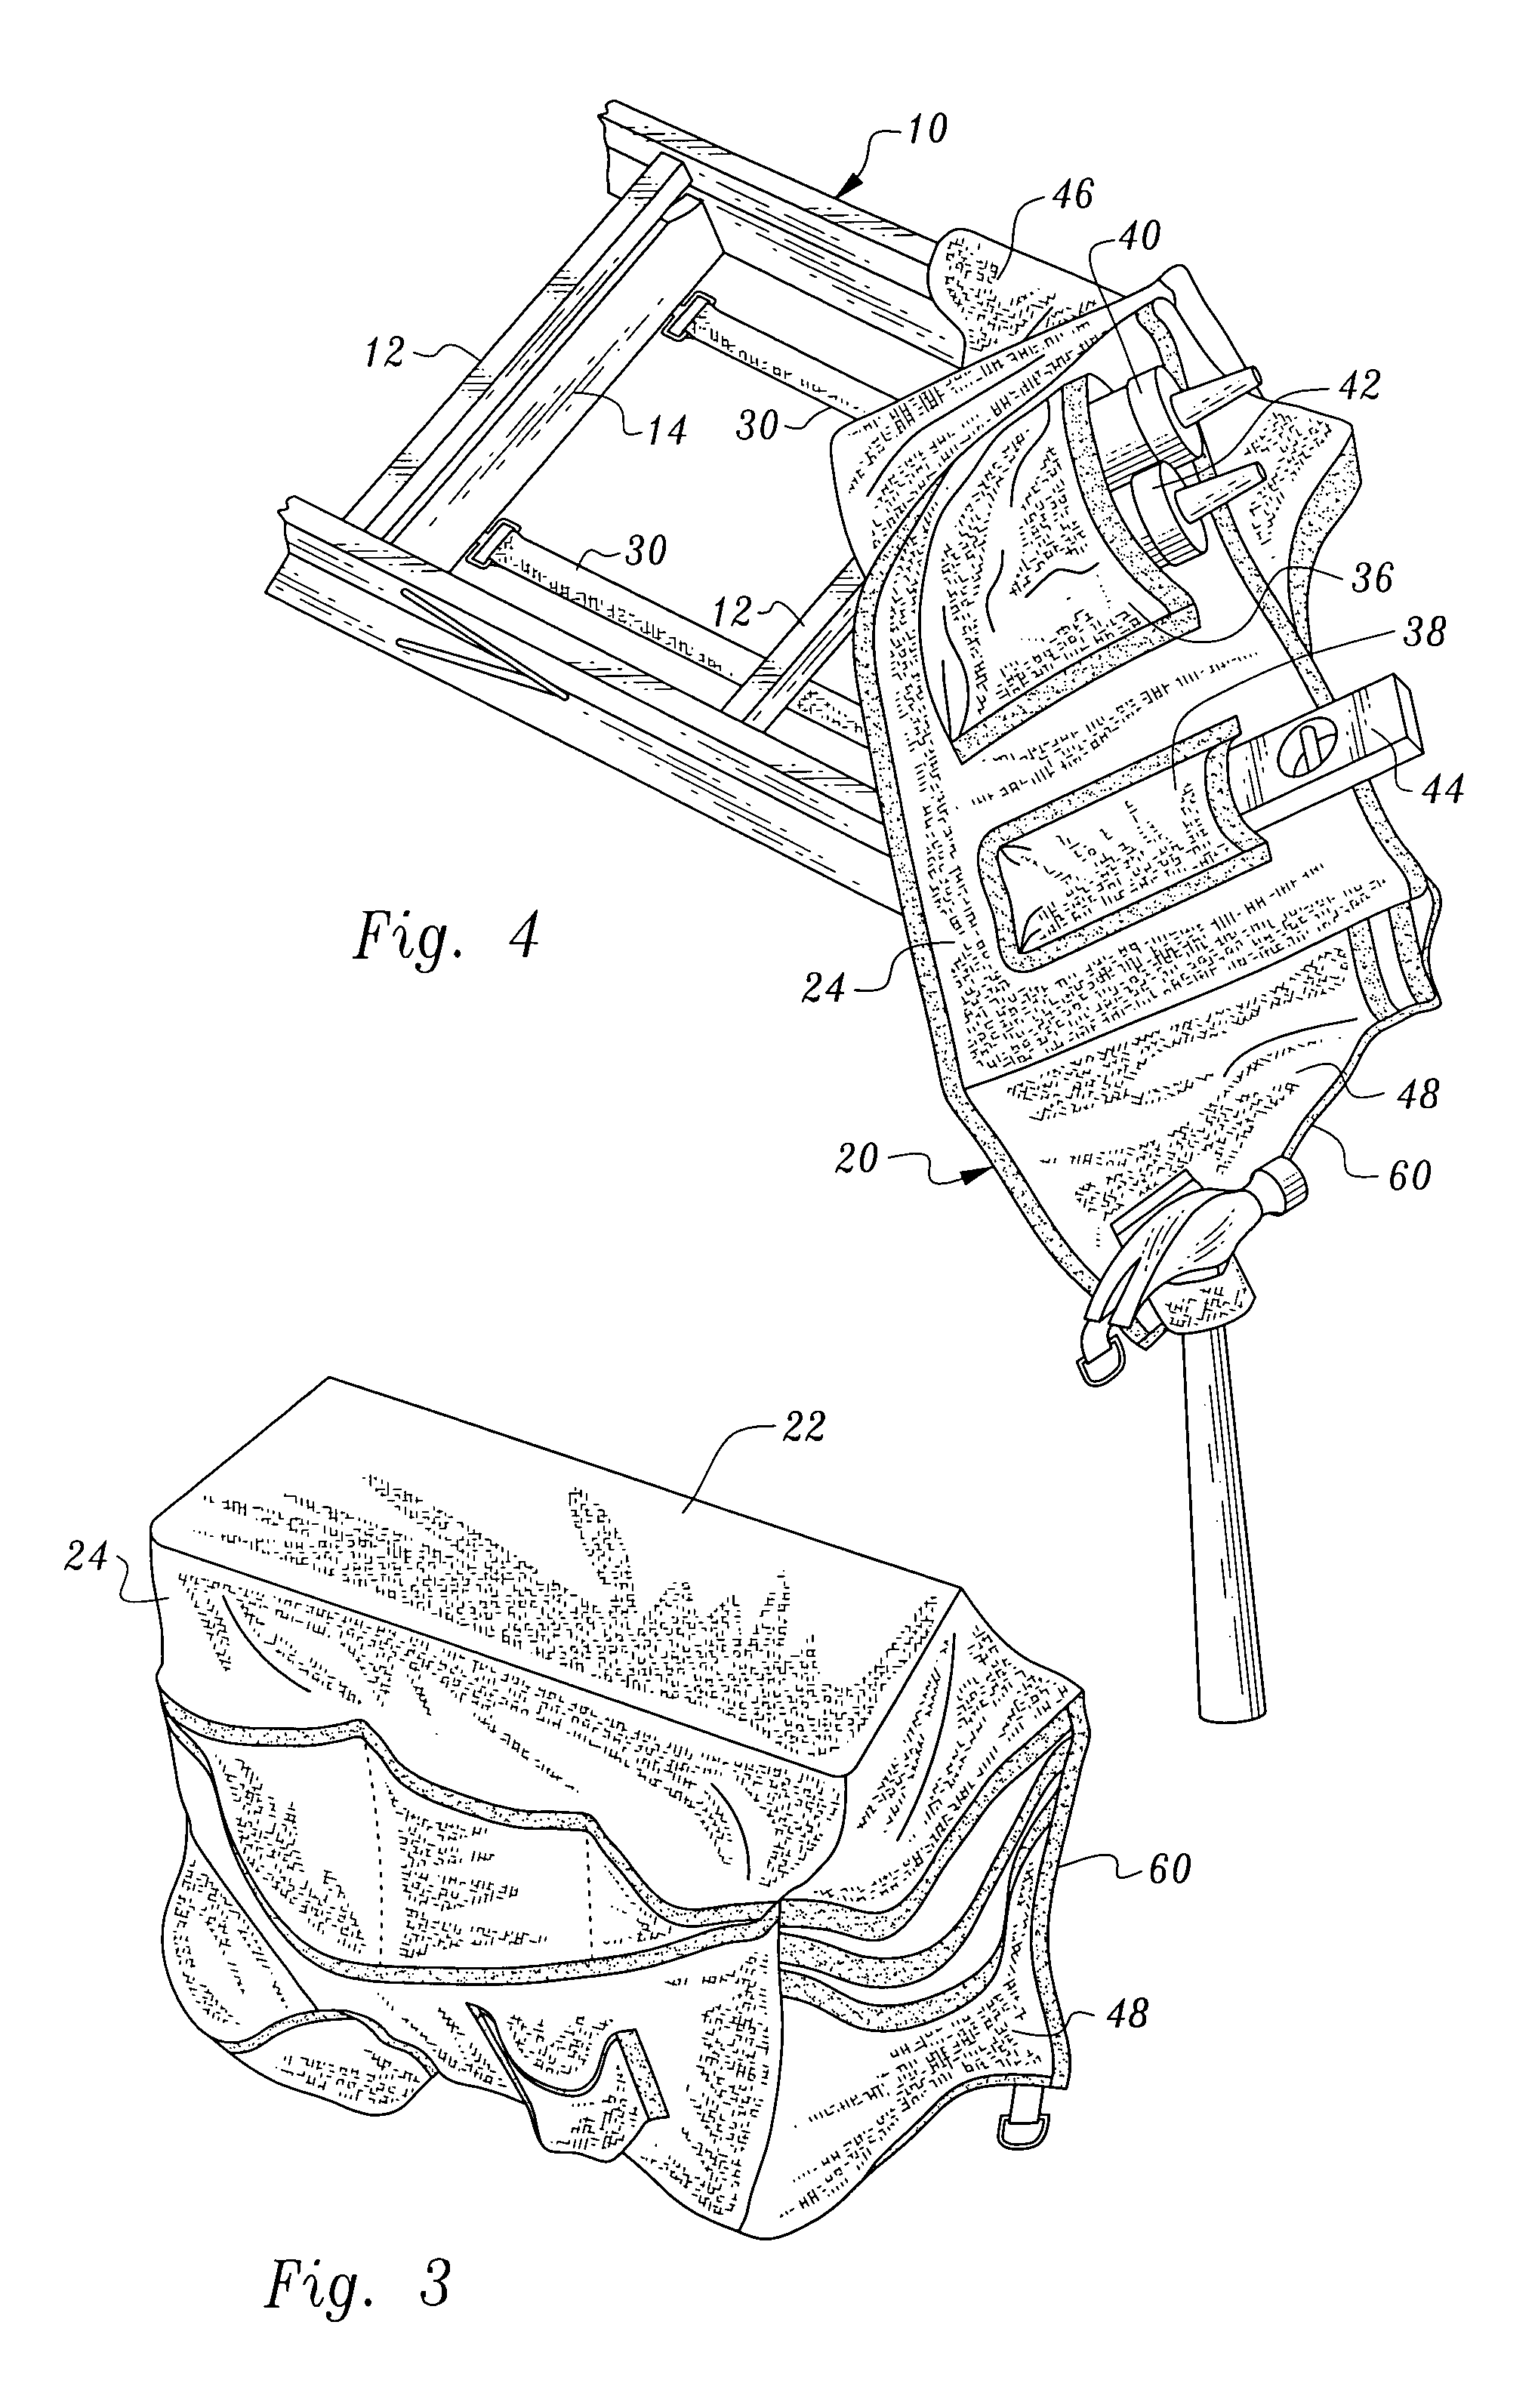 Holder for supporting tools and other objects from a ladder